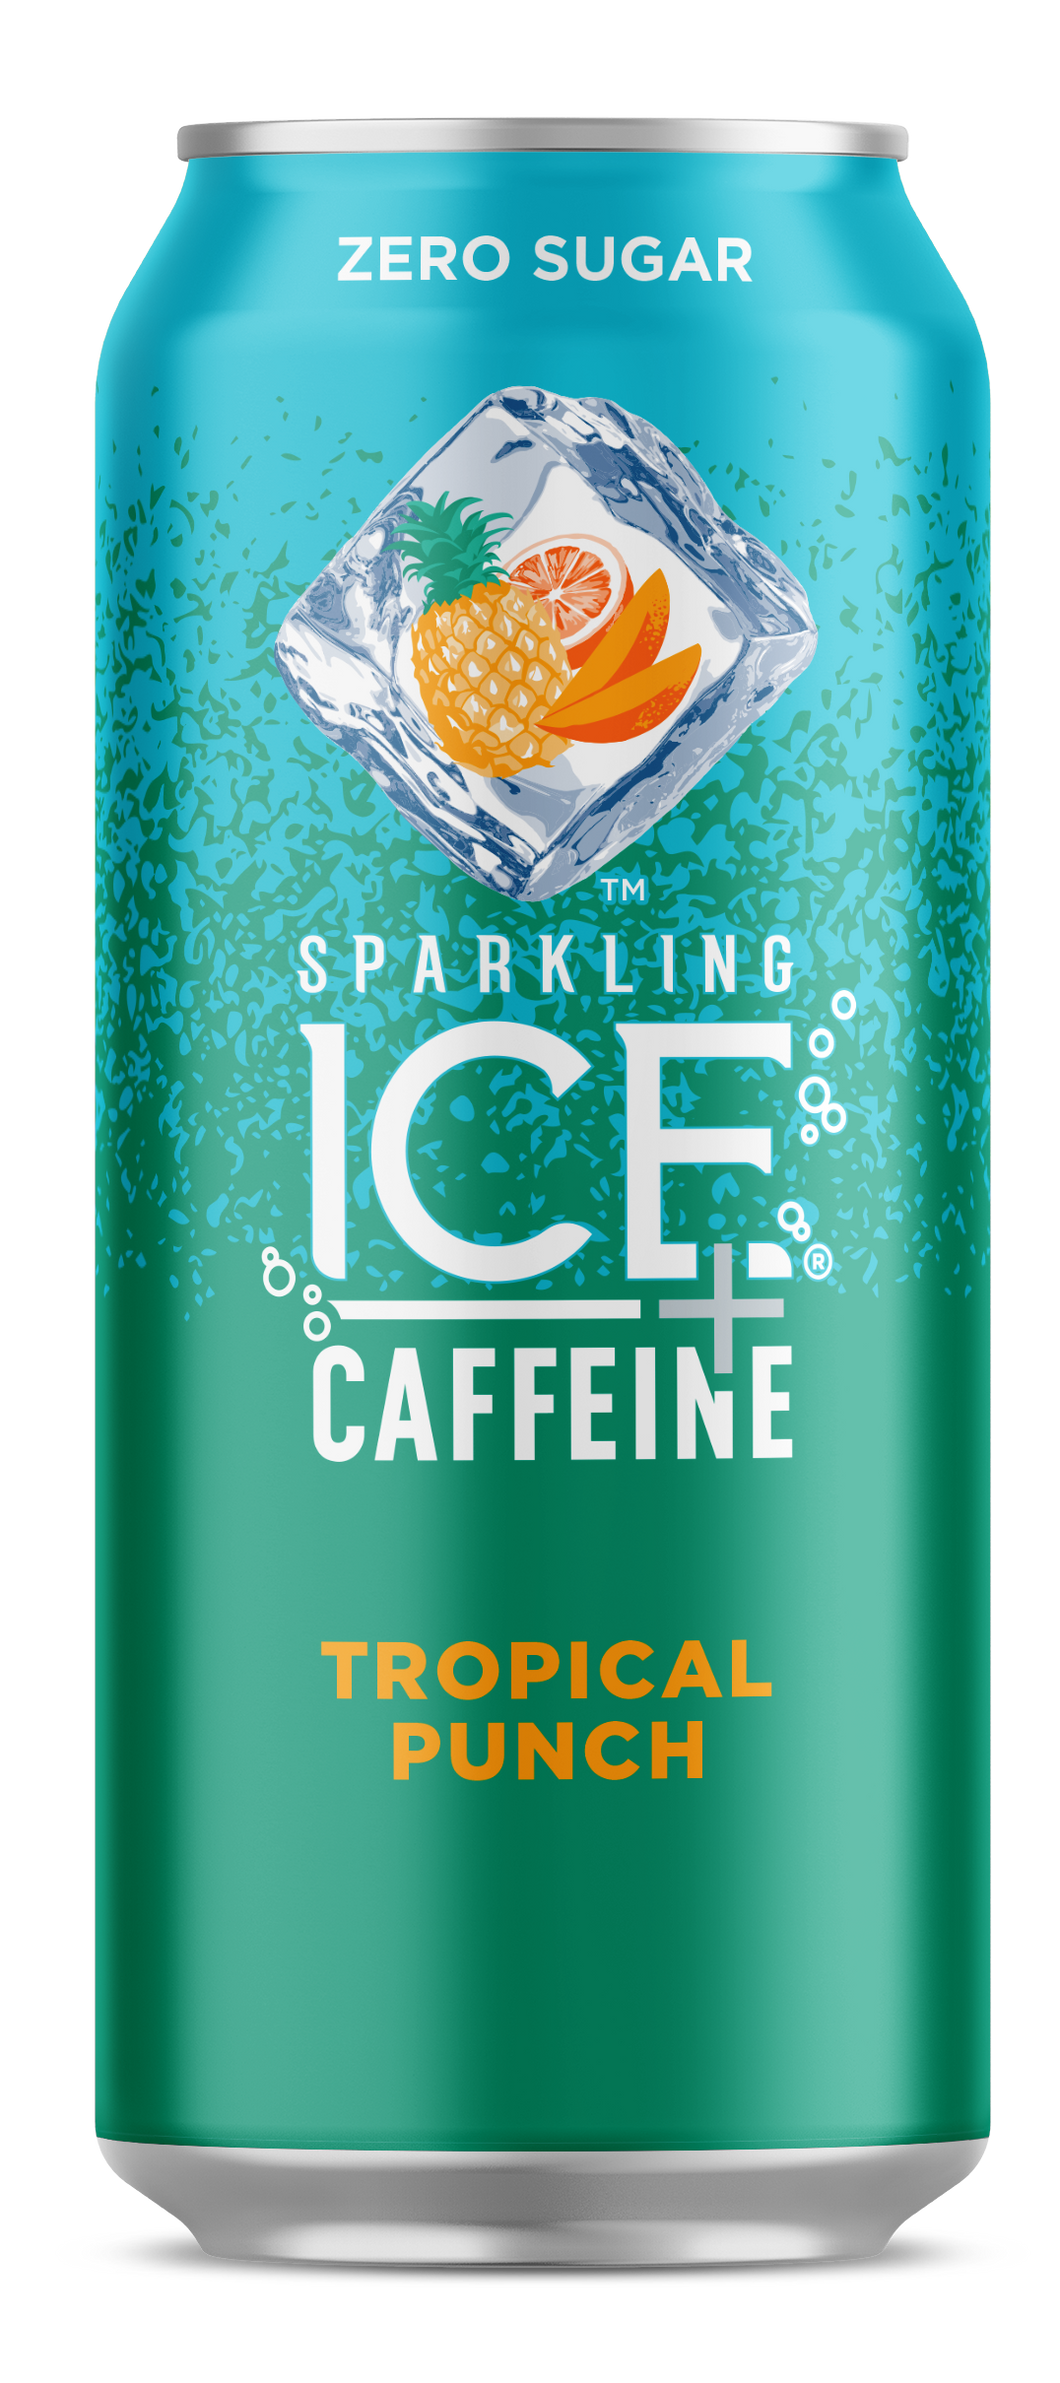 Sparkling ICE Naturally Flavored Sparkling Water + Caffeine, Tropical Punch, 16oz Cans (Pack Of 12)